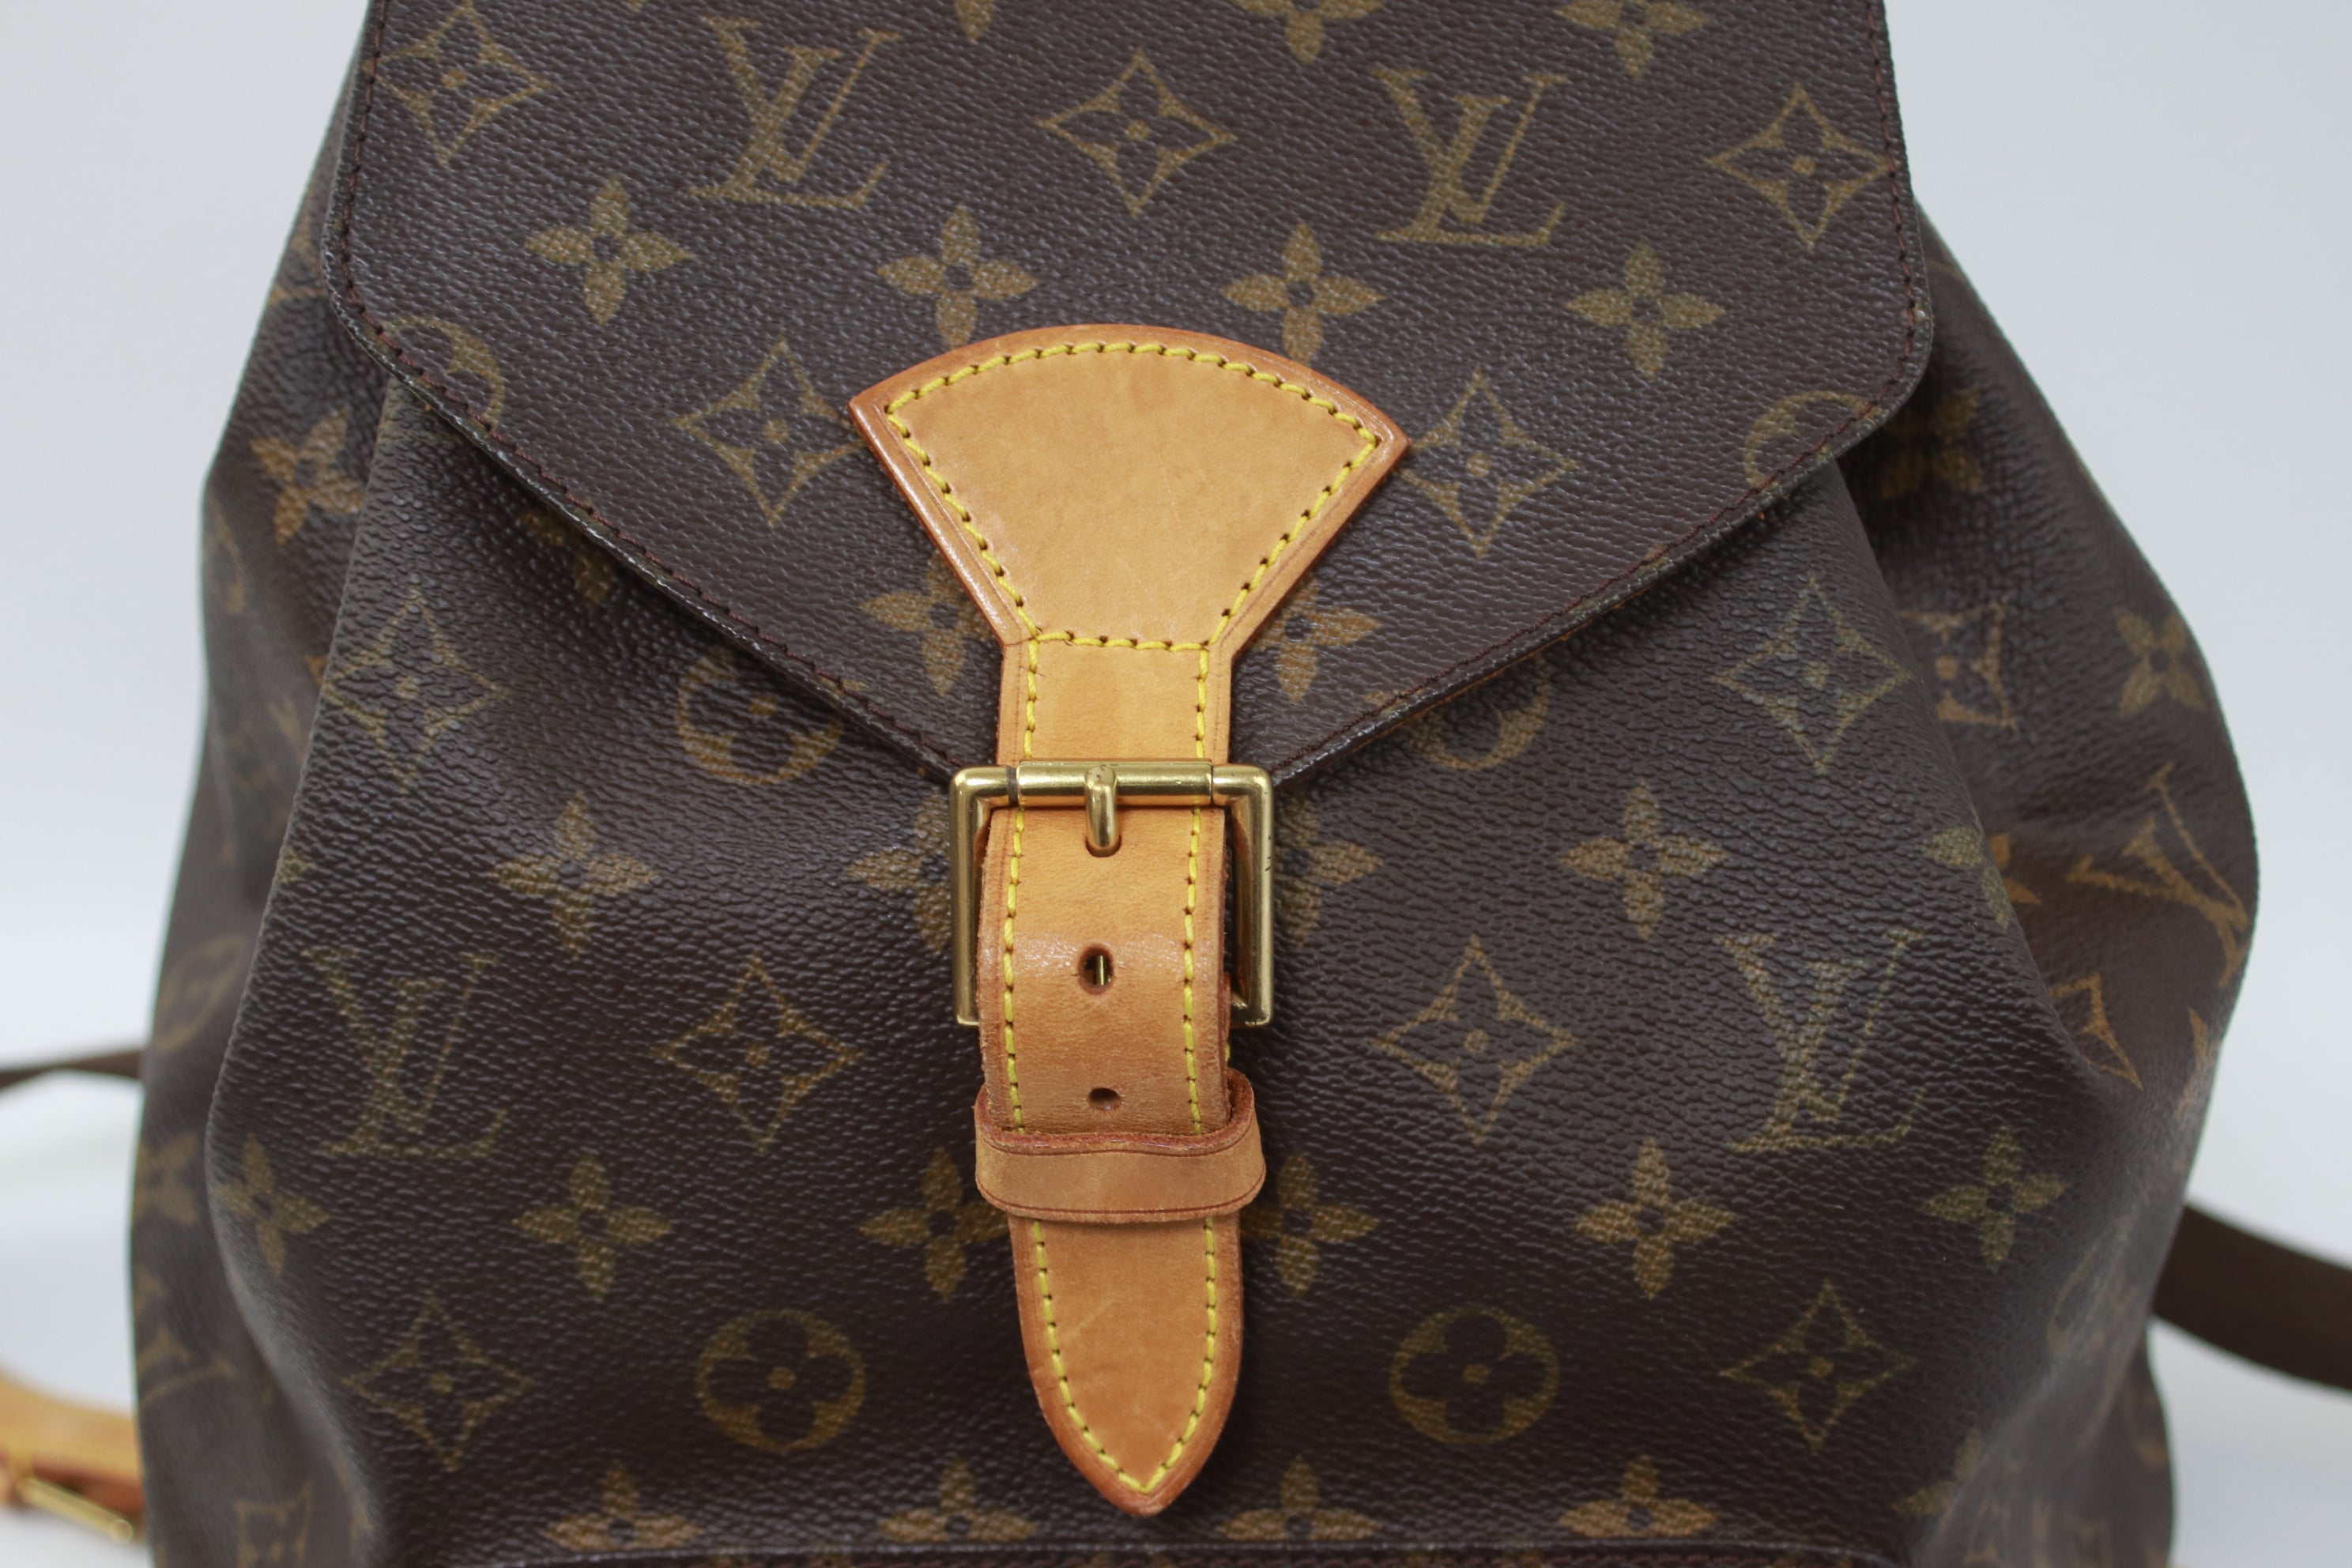 Louis Vuitton Montsouris GM Backpack Used (6803)